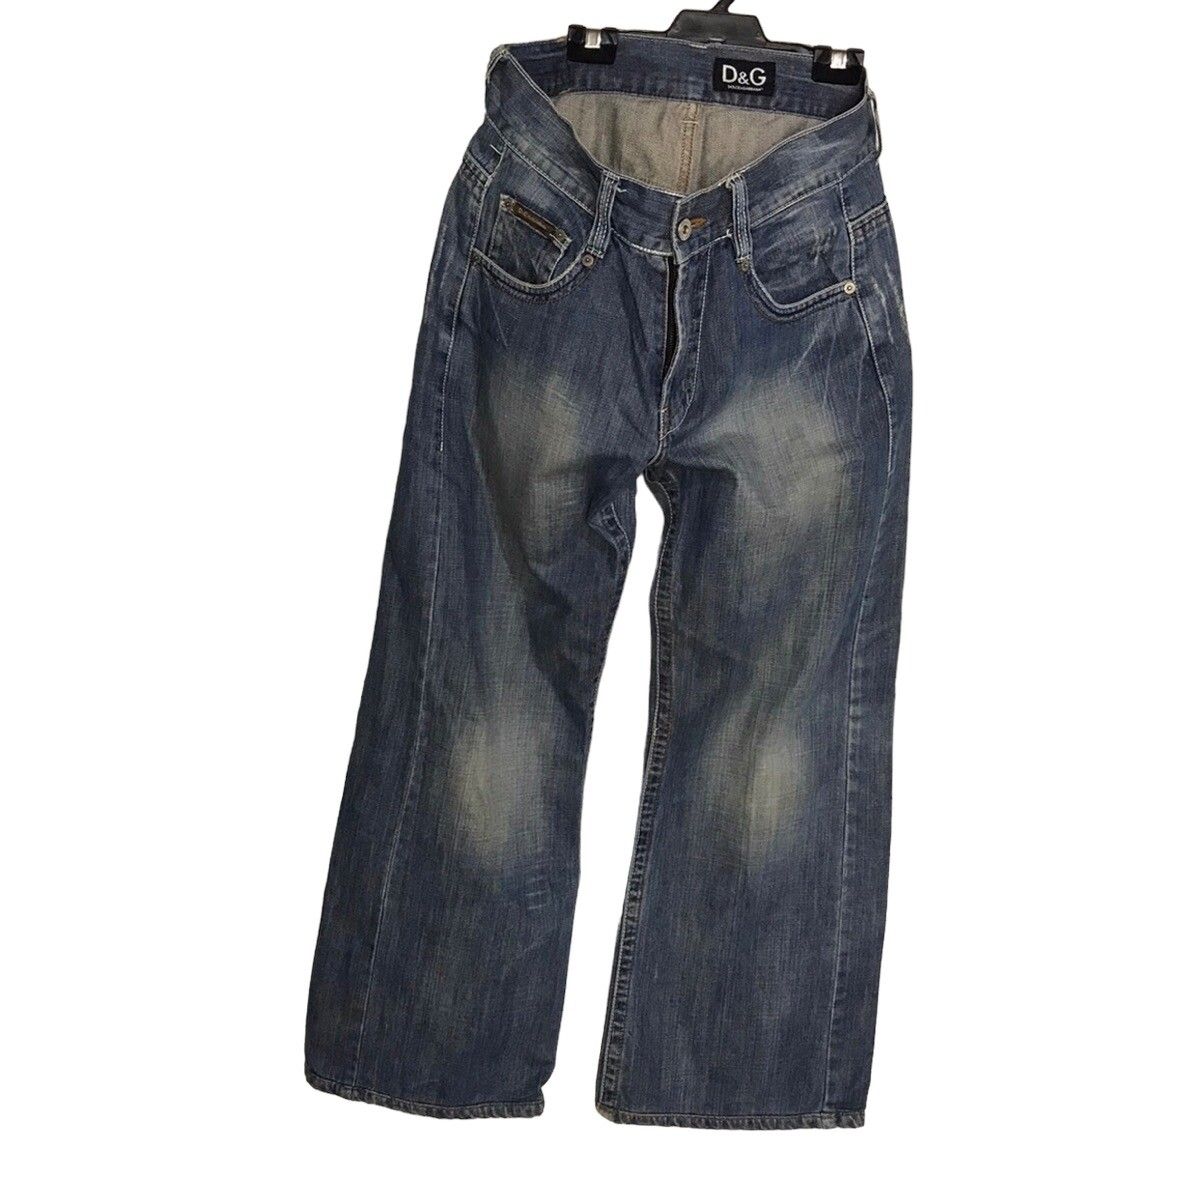 D&G denim pants made in italy - 1